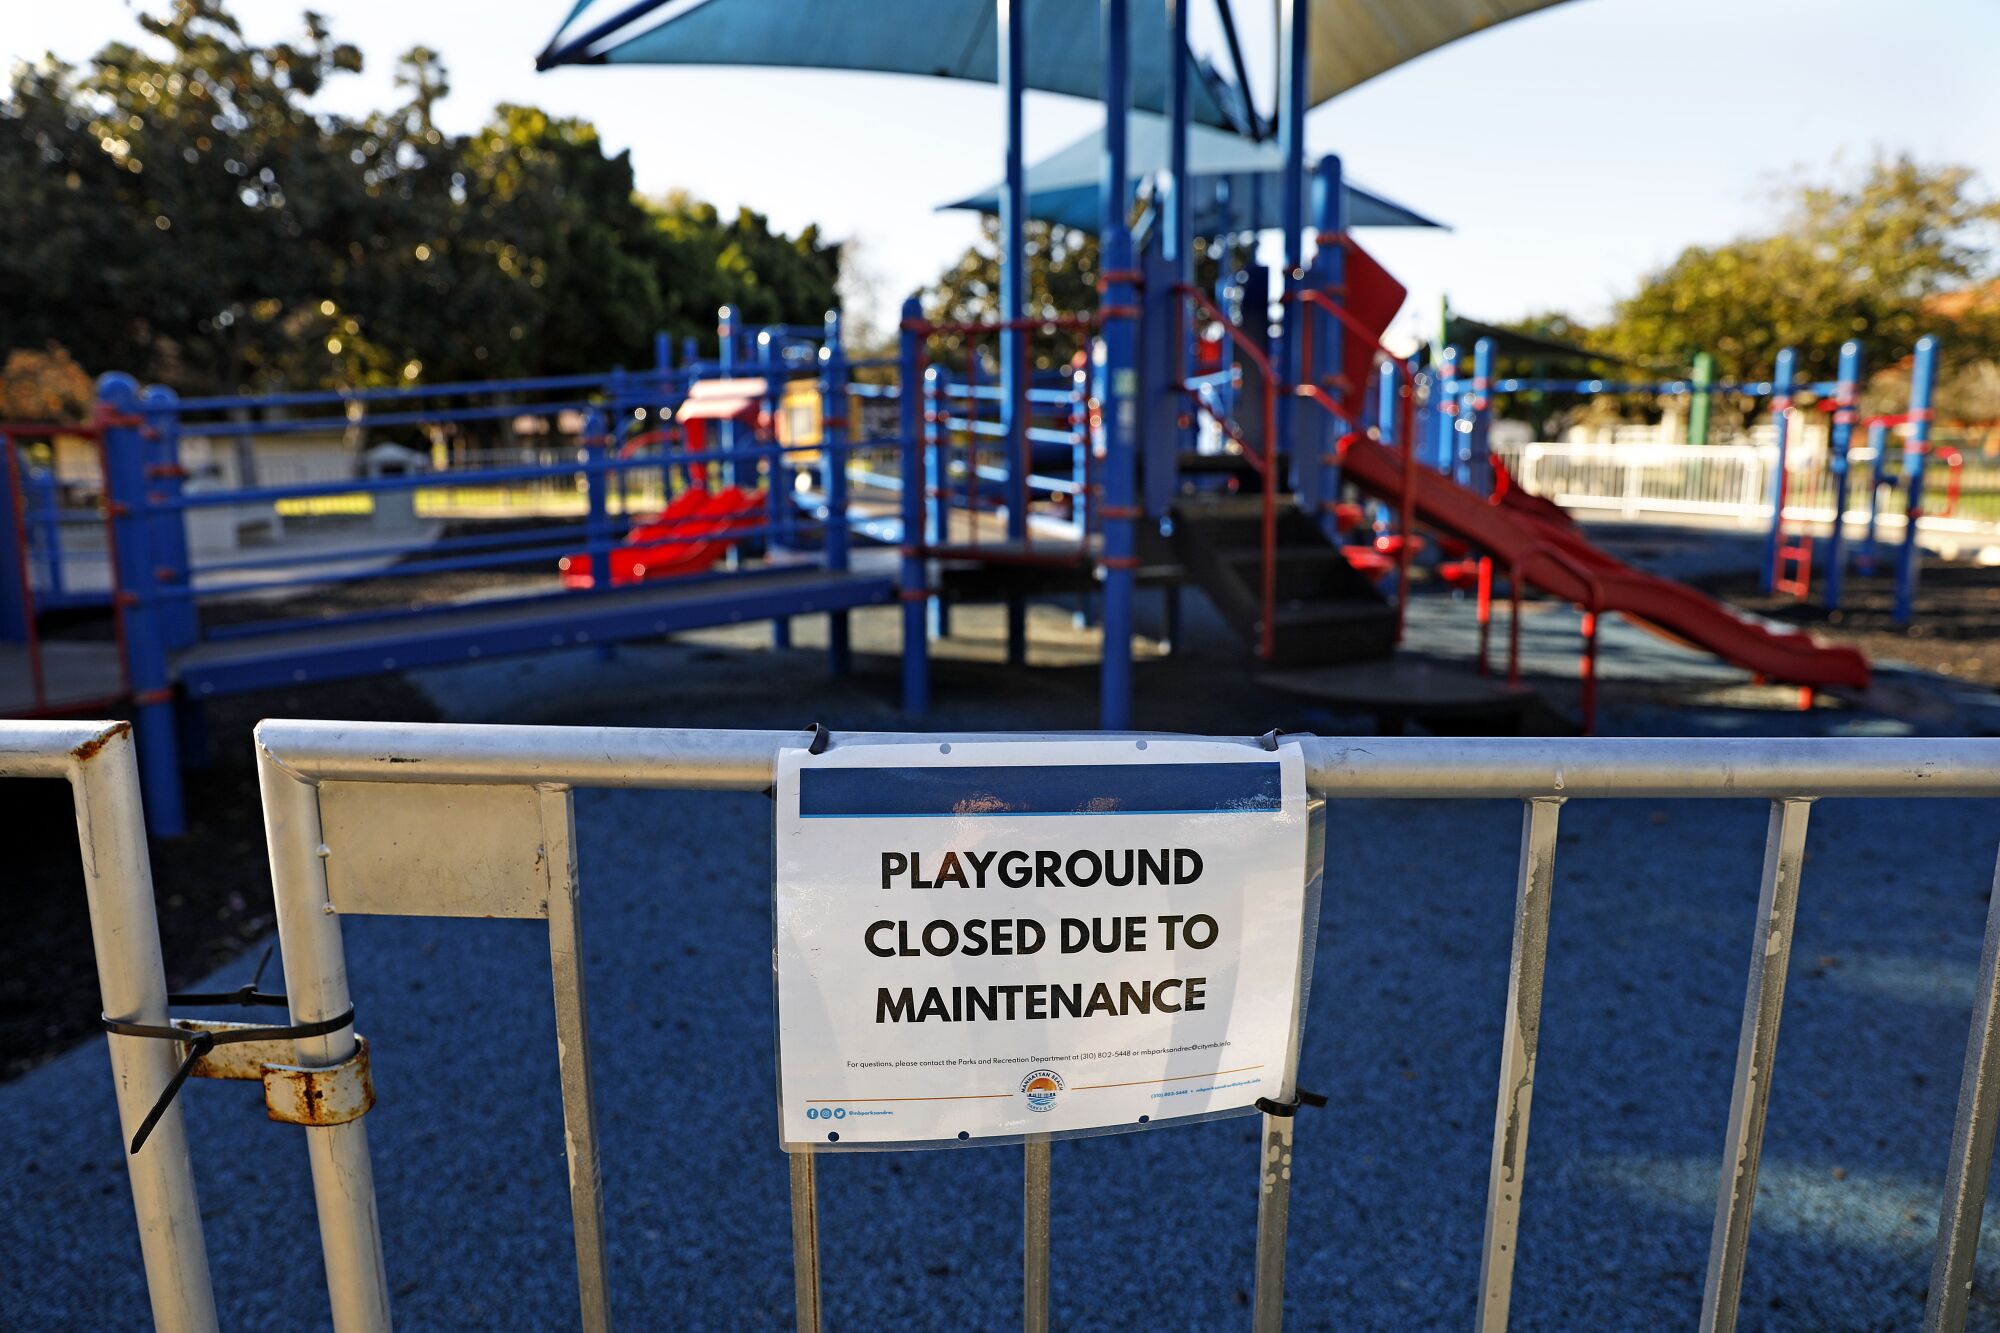 A zip tie secures the gate of a fence around a playground where a sign reads "Playground closed due to maintenance."